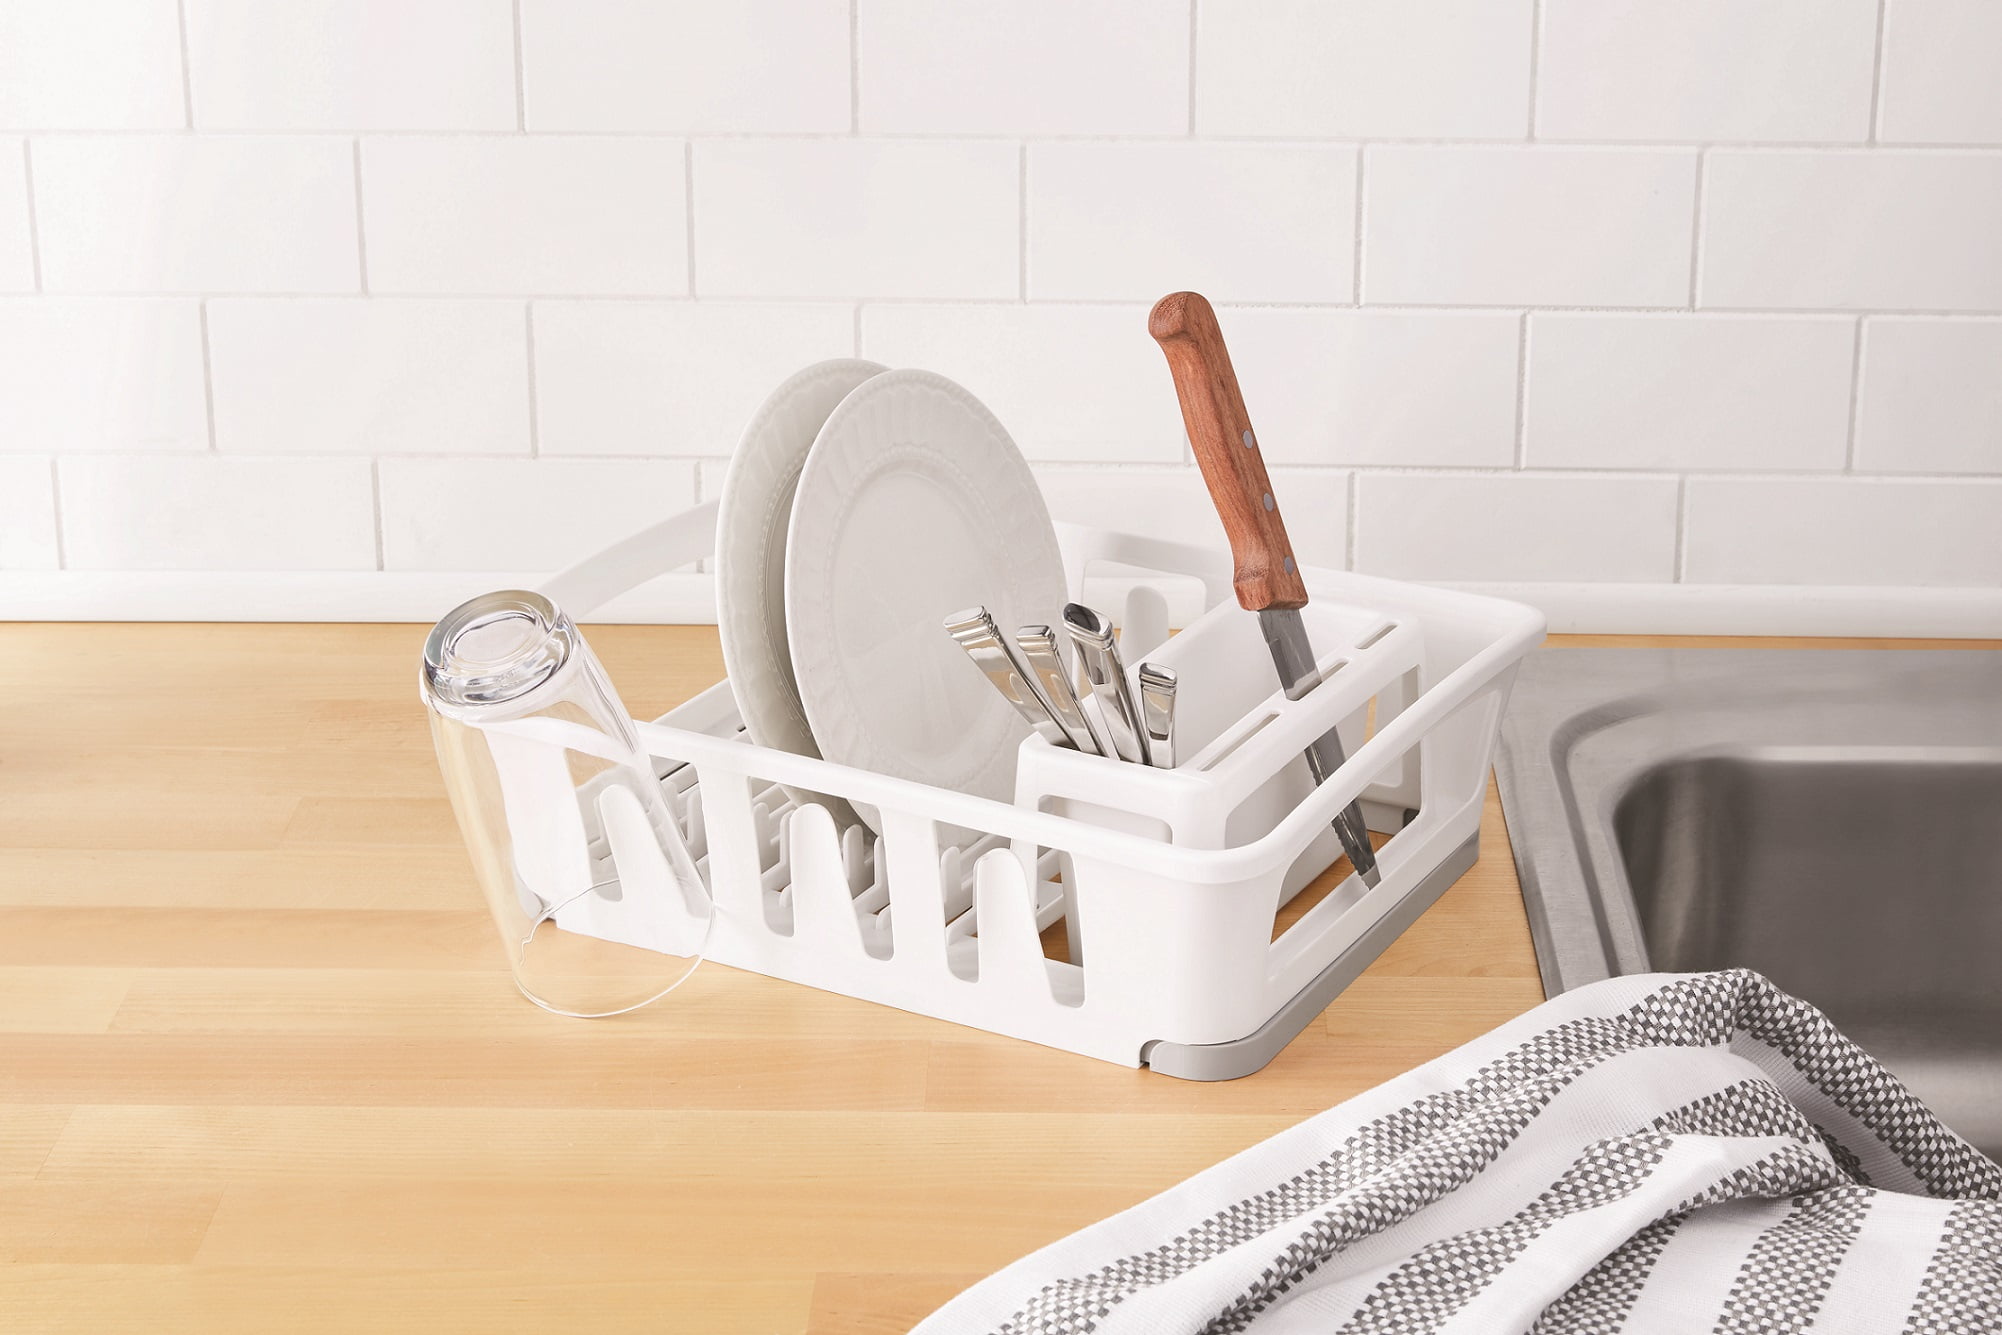 SNTD Dish Drying Rack - Expandable Dish Rack for Kitchen Counter, Large Dish Drainer, Stainless Steel Drying Dish Rack with Utensil Holder, White